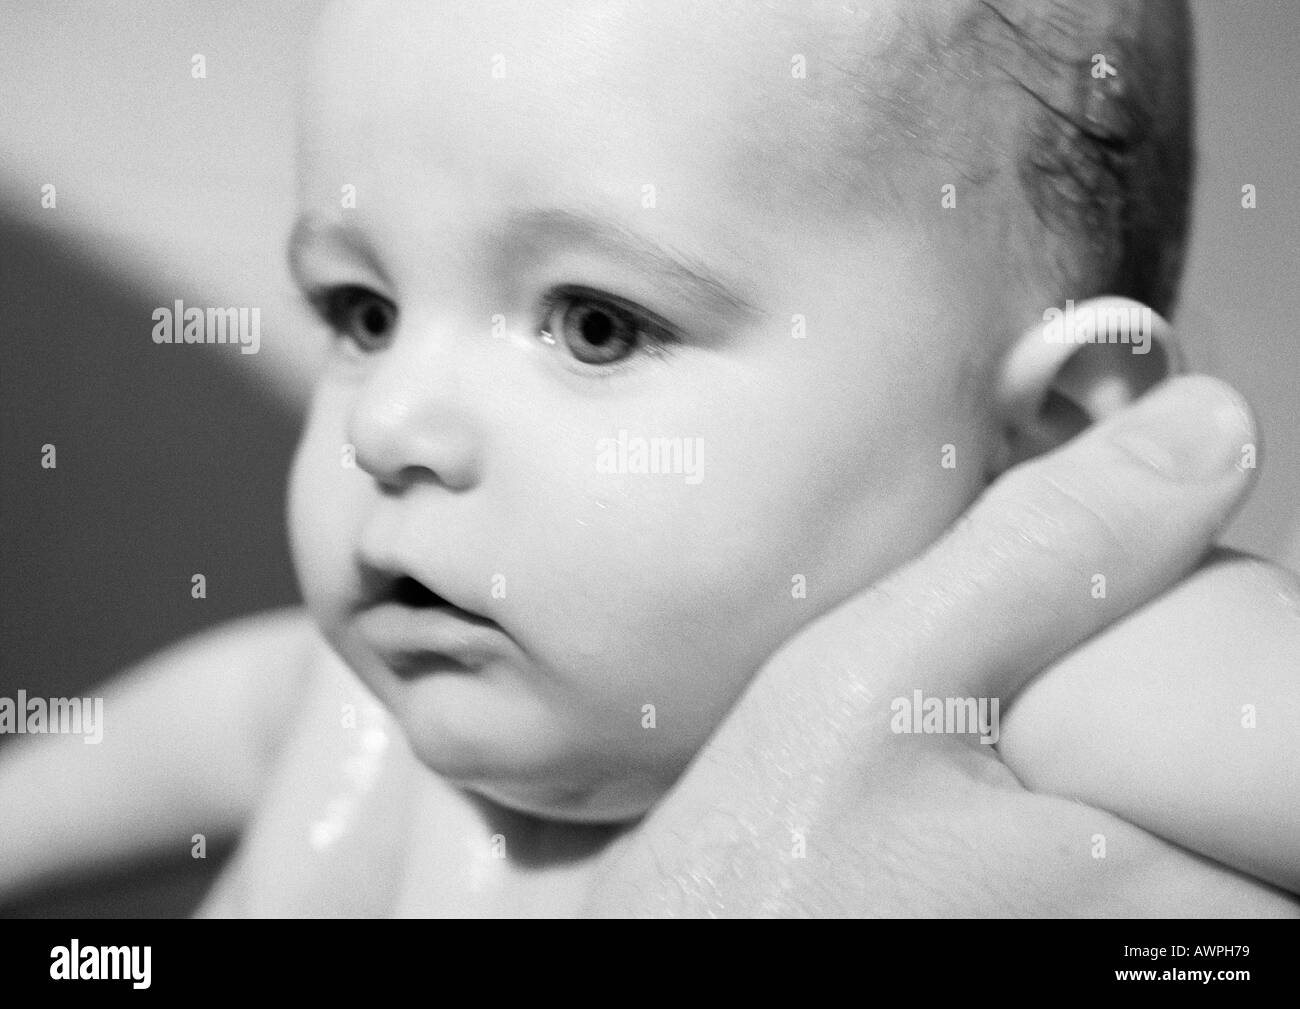 Adult's hands holding baby under arms, close-up, b&w Stock Photo